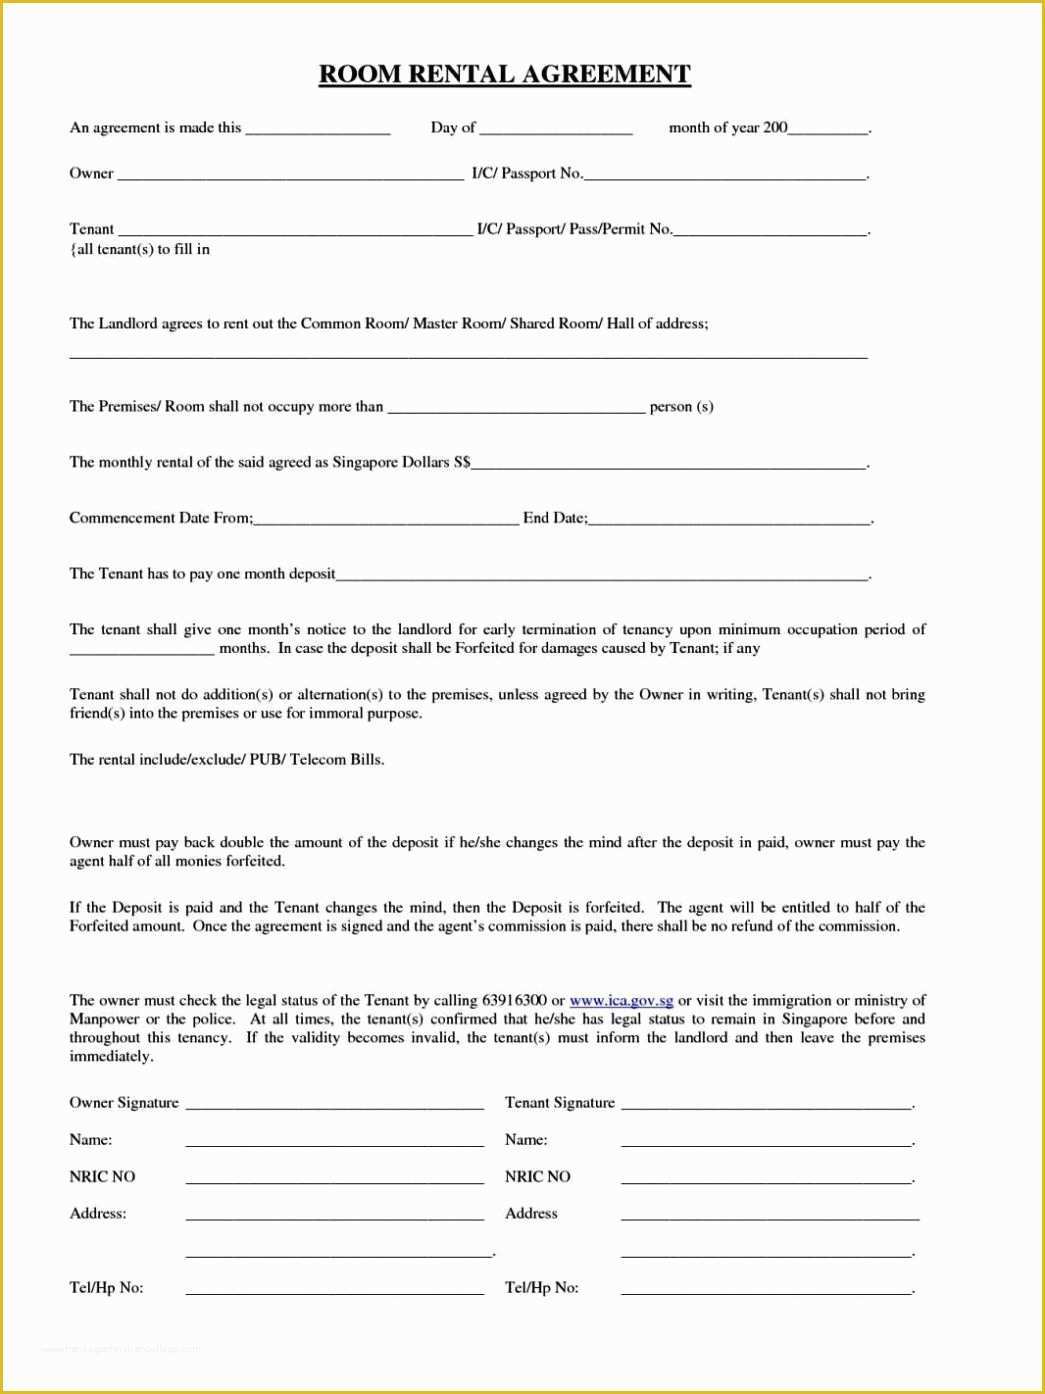 Free Room Rental Agreement Template Of Free Room Rental Lease Agreement Template